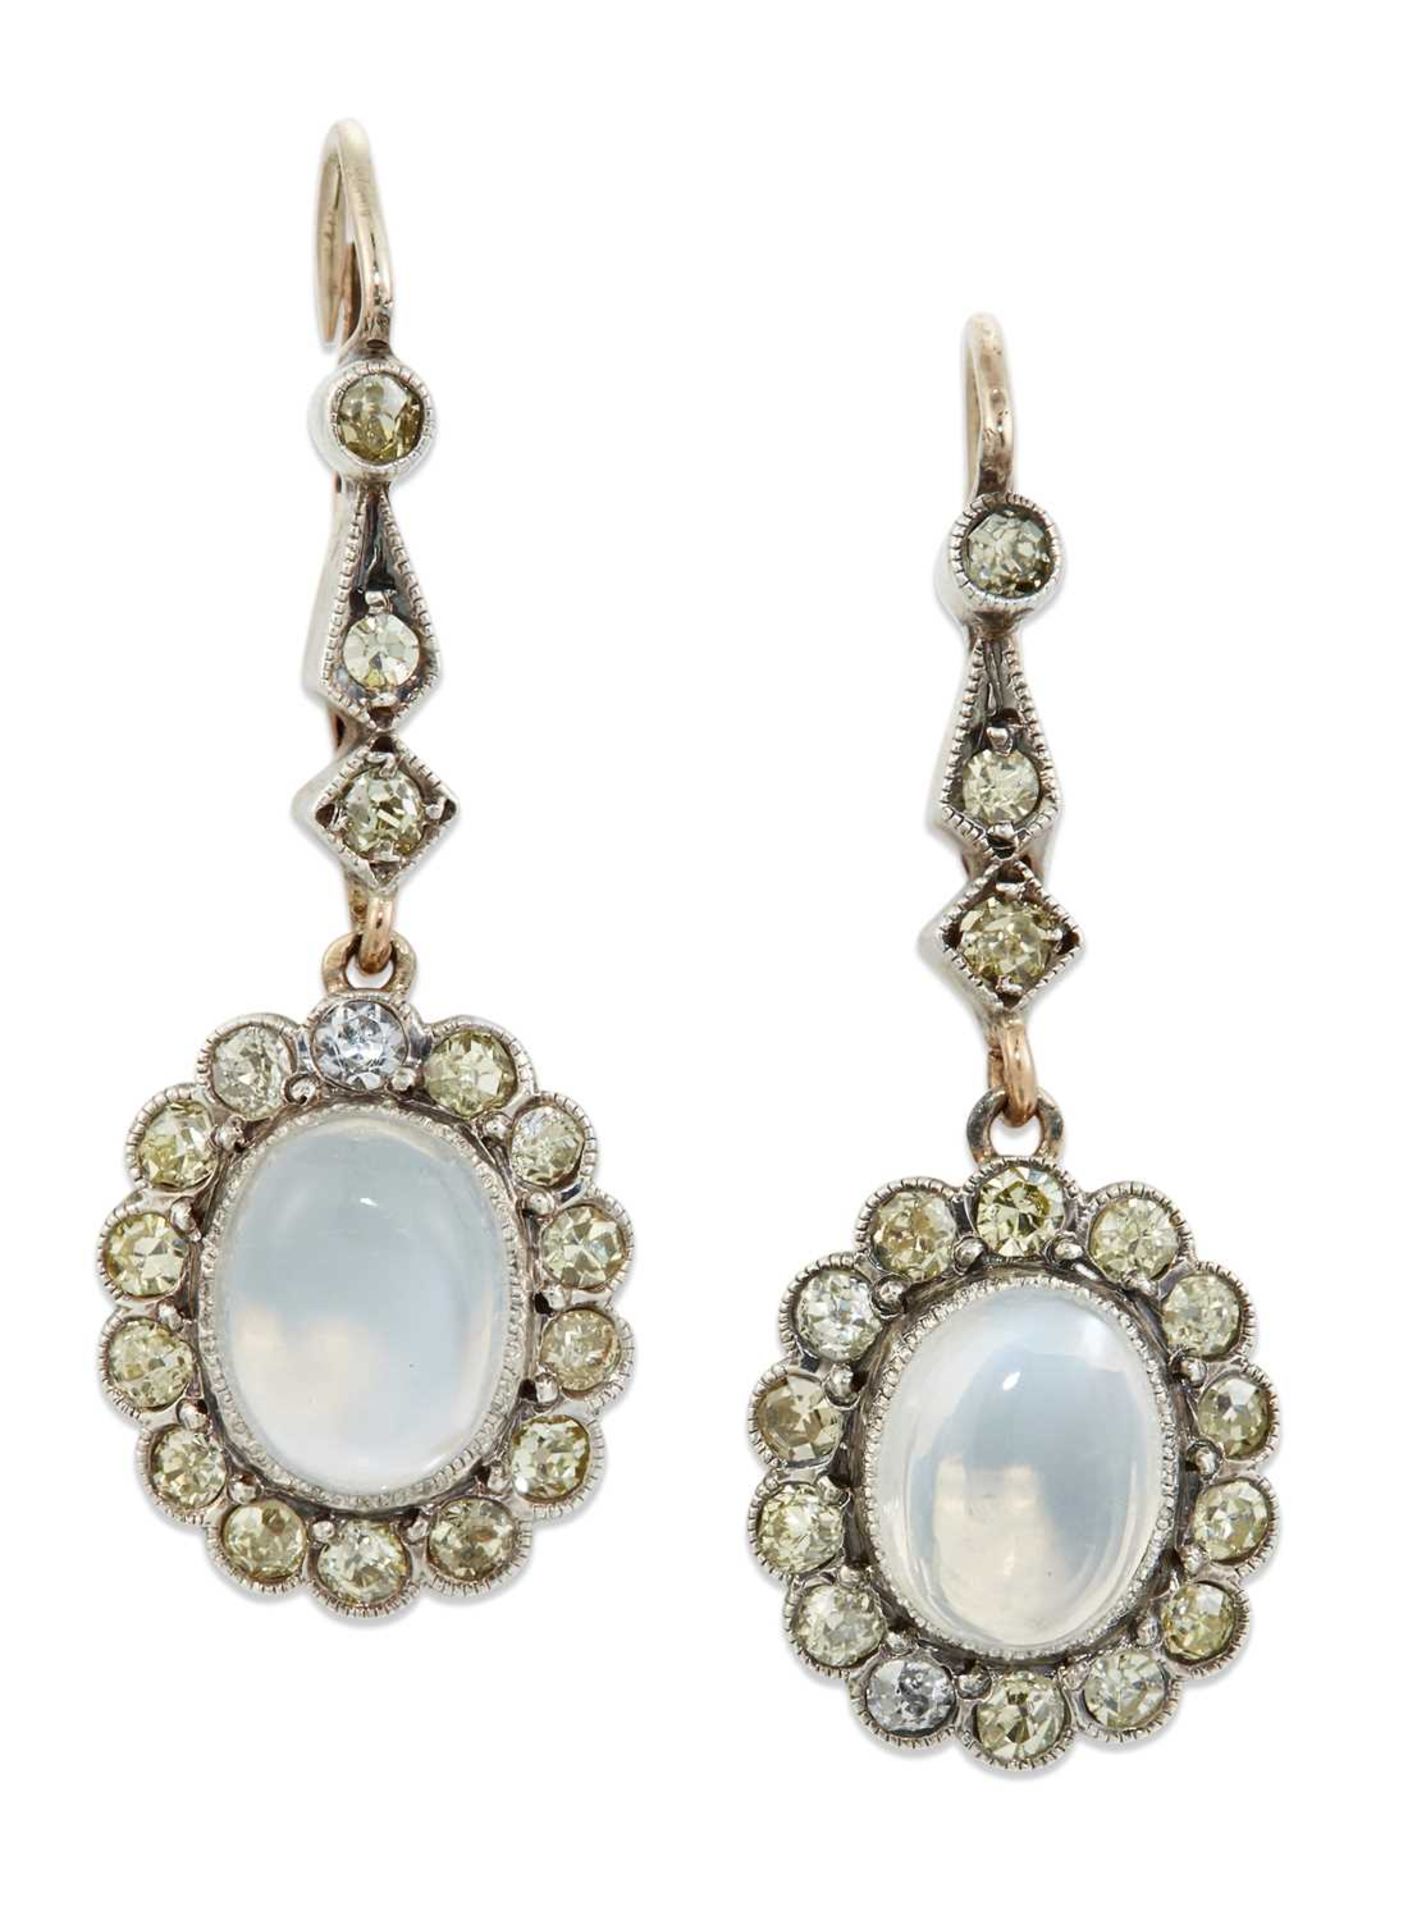 A PAIR OF EARLY 20TH CENTURY MOONSTONE AND DIAMOND CLUSTER PENDANT EARRINGS